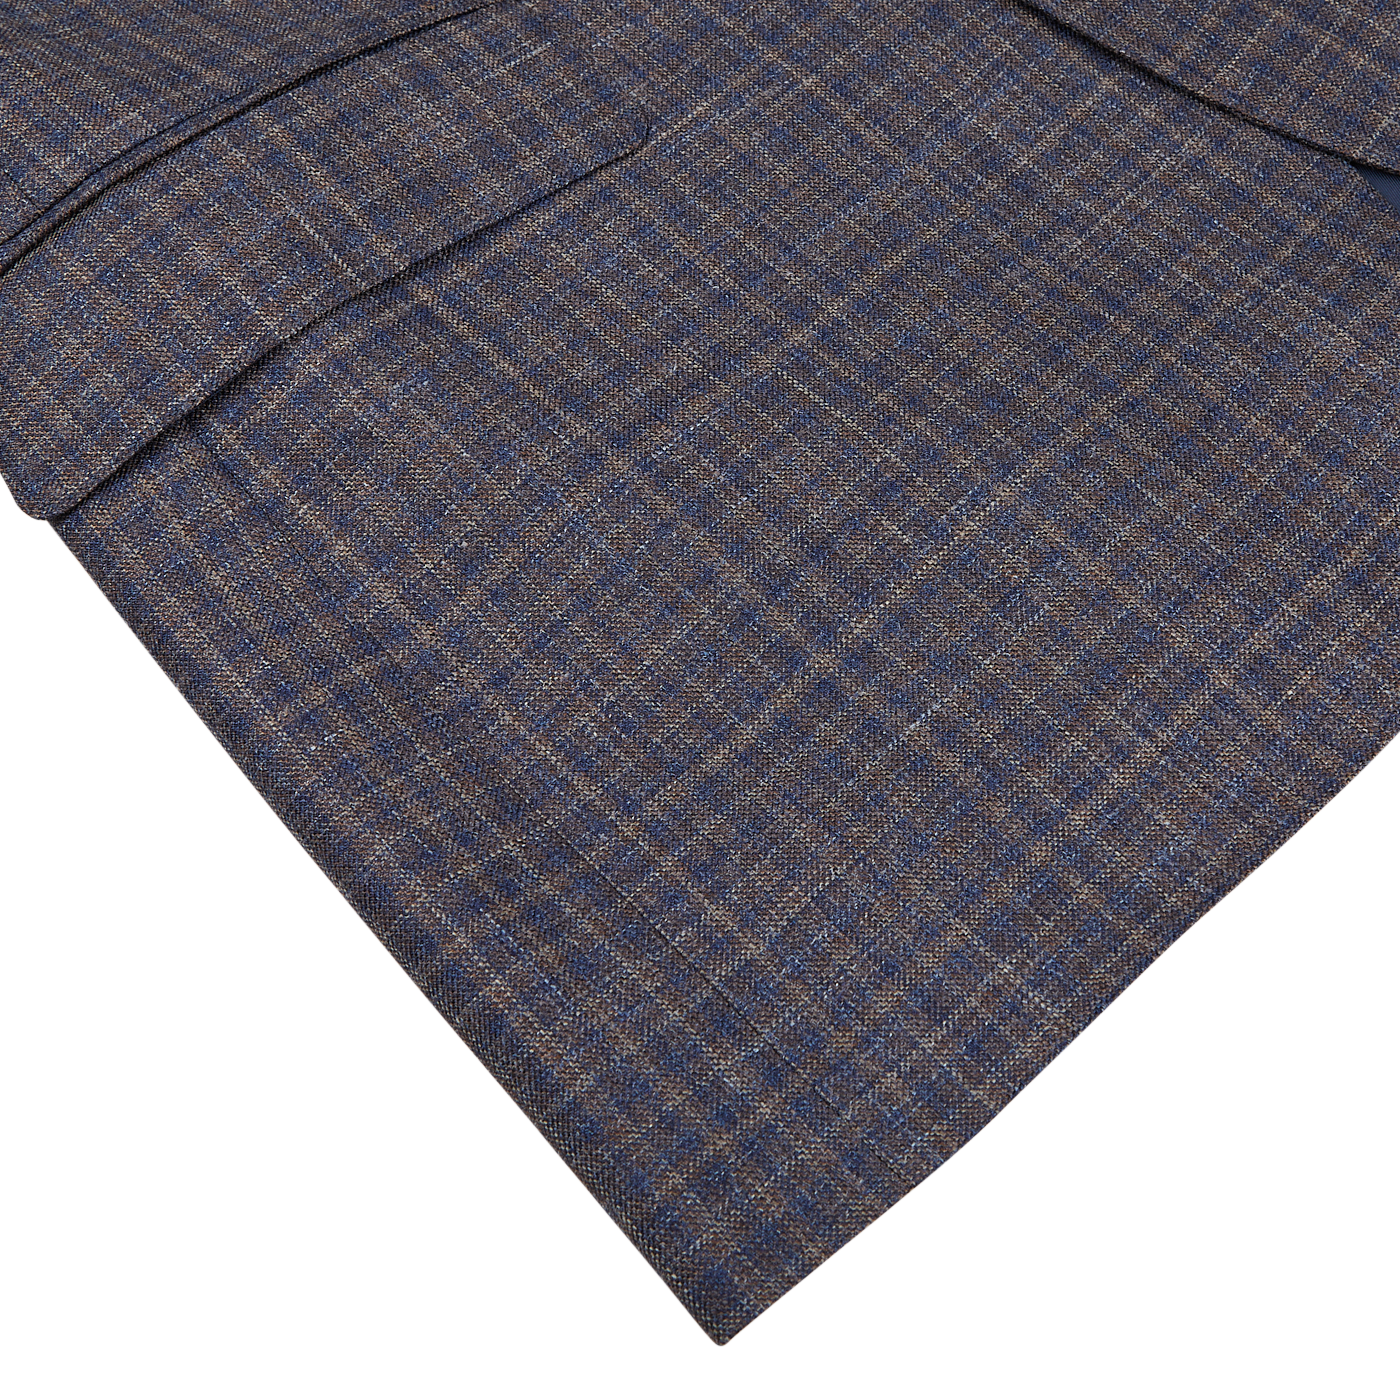 Close-up of a blue and brown Canali Gingham checked fabric of a tailored suit jacket laid flat against a white background.